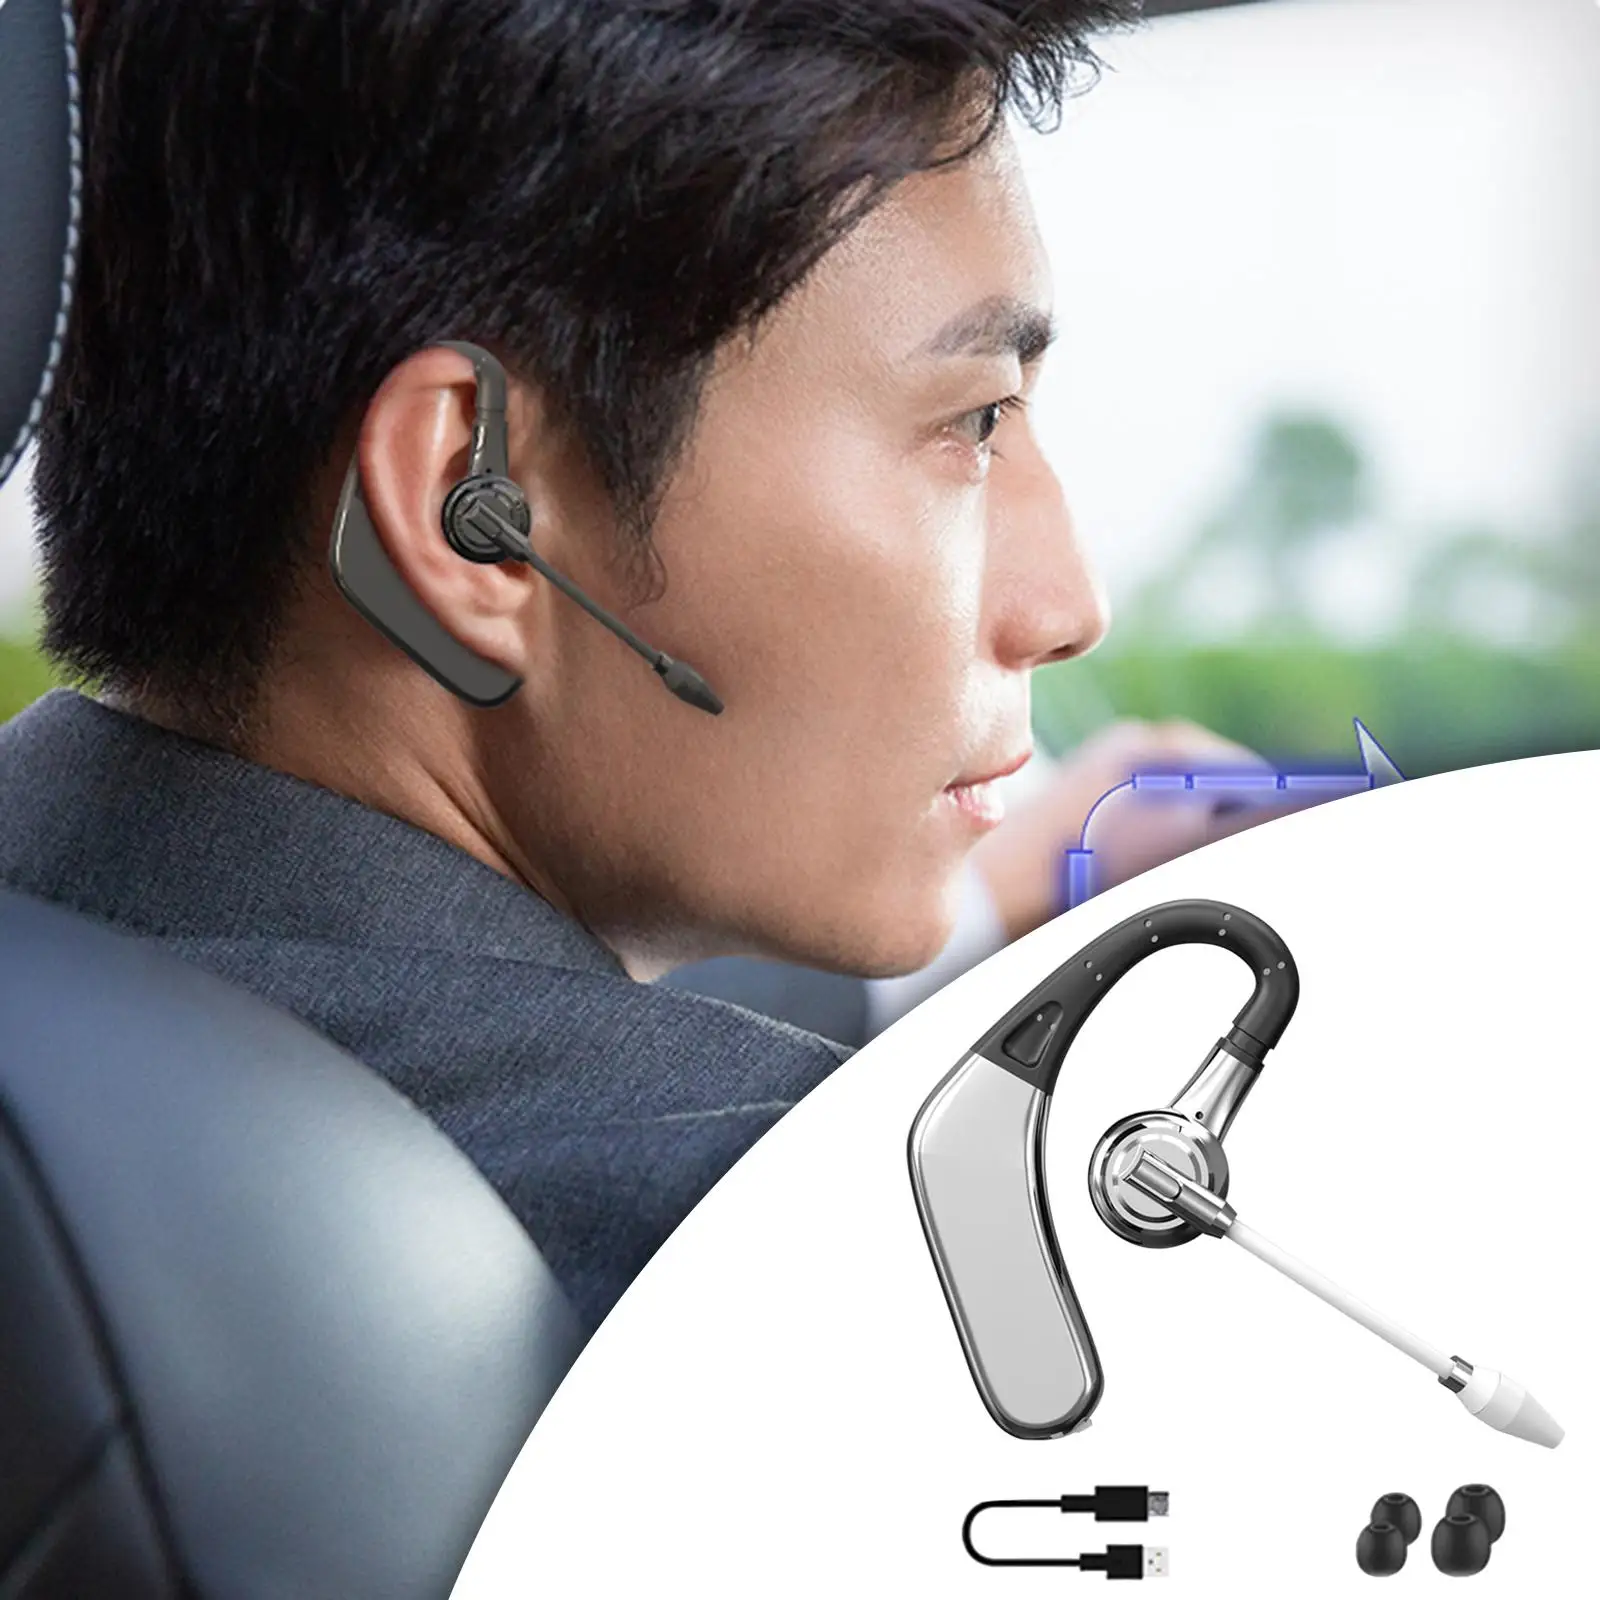 Wireless Bluetooth Headphone Intelligent Noise Reduction Earphones 180° Rotating Earpiece HD Call Sweatproof for Game Driver